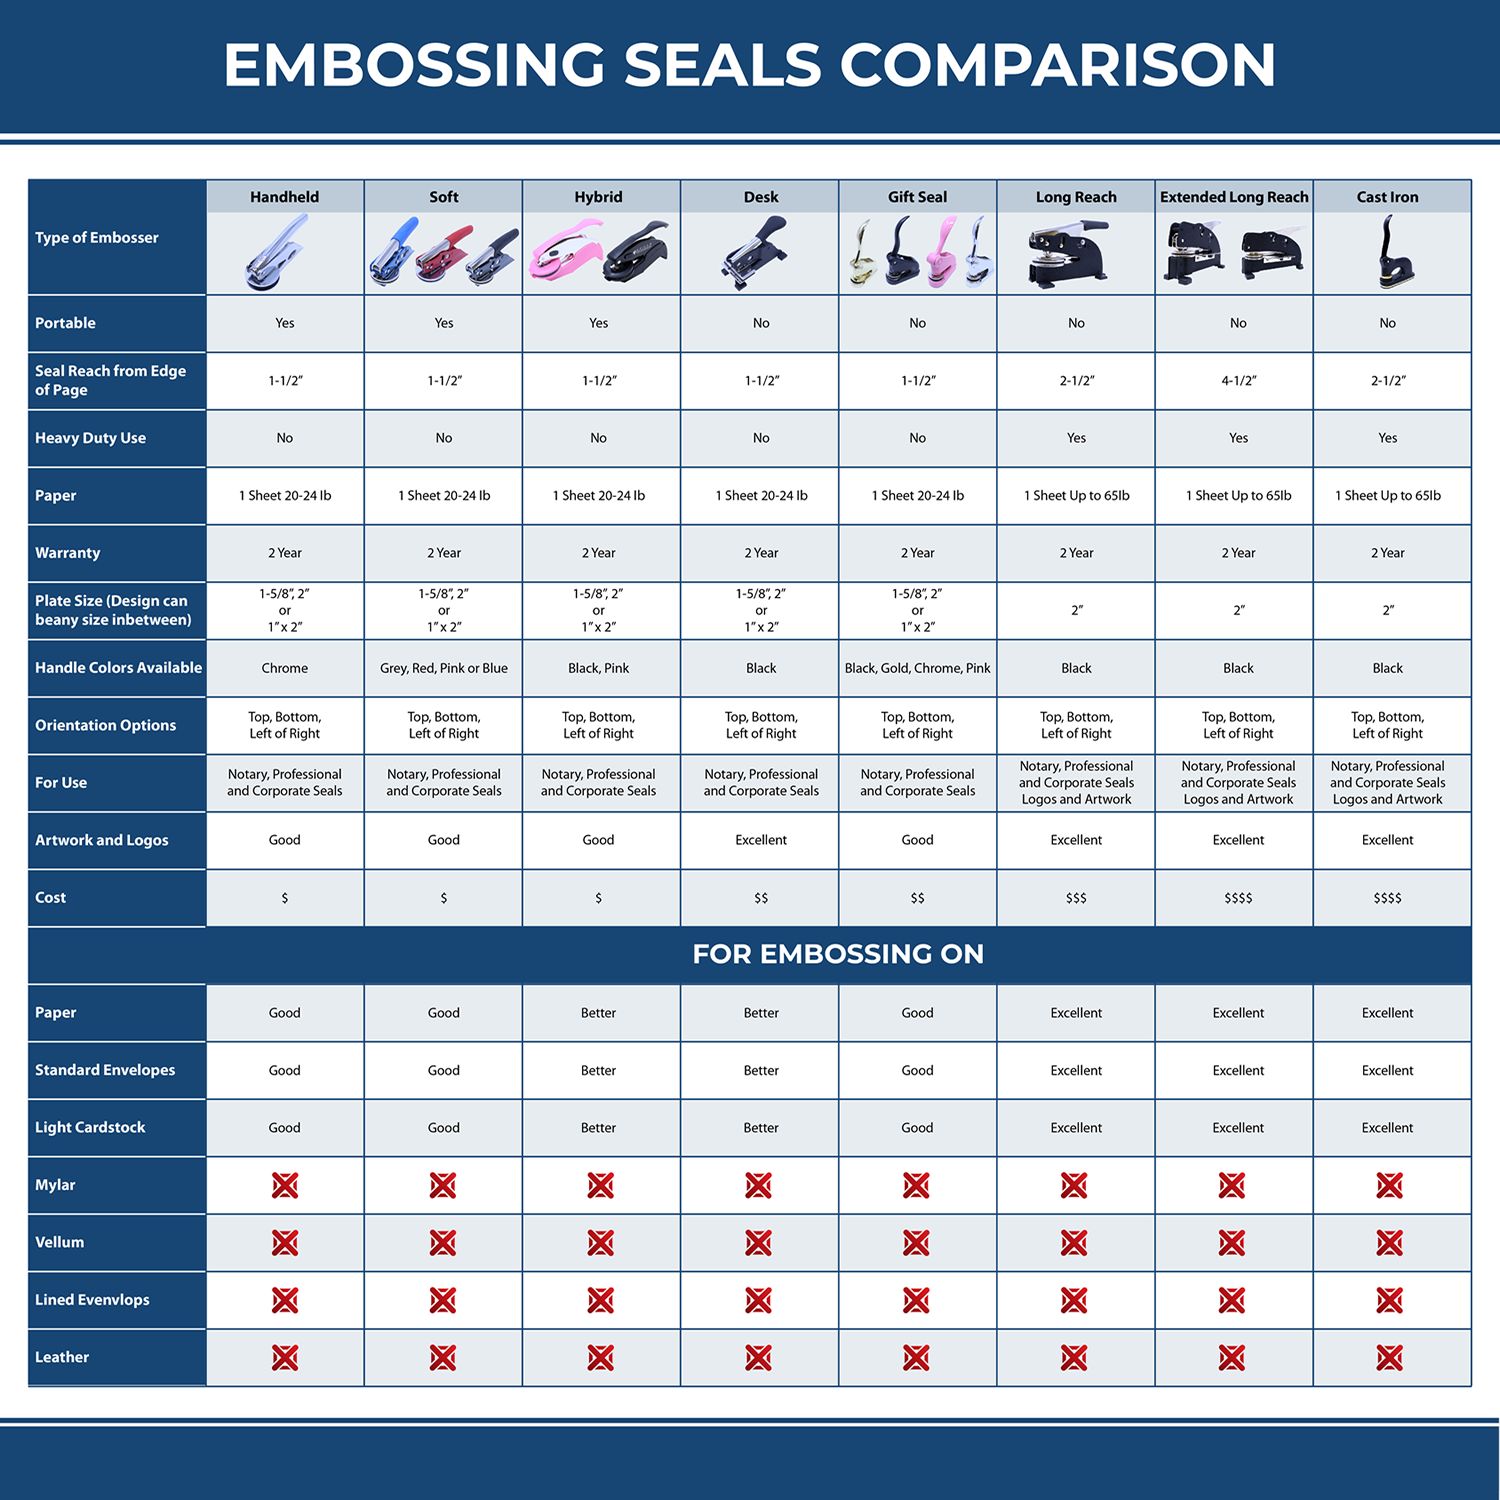 A comparison chart for the different types of mount models available for the Handheld Colorado Professional Engineer Embosser.